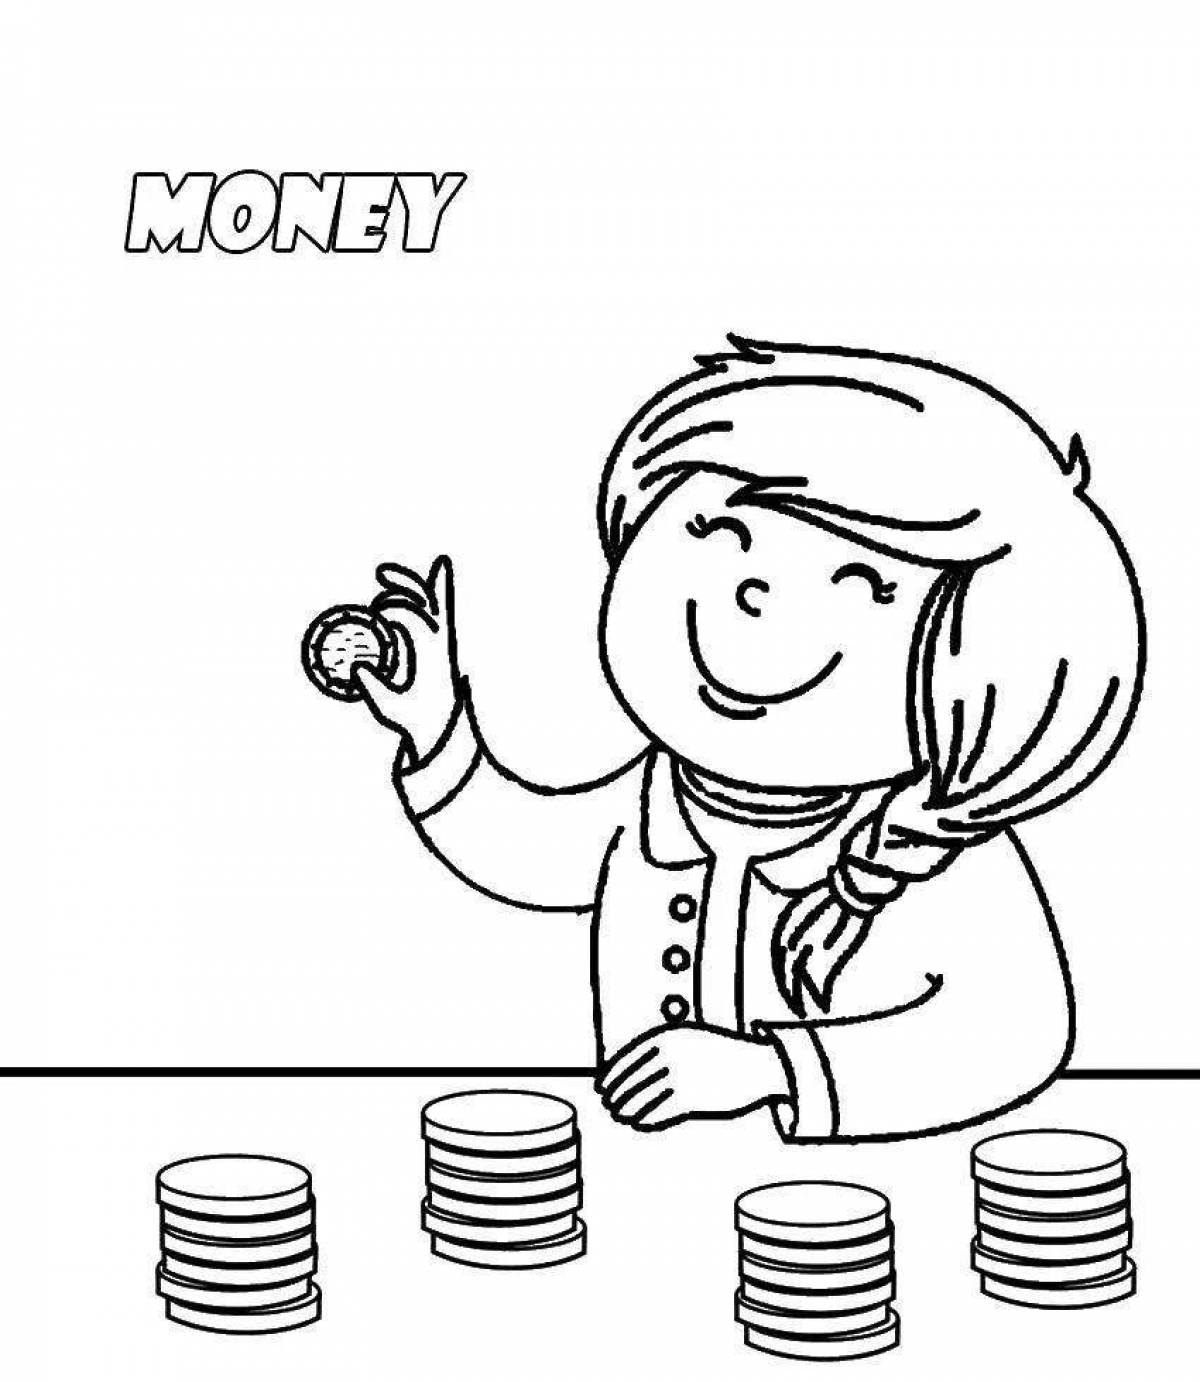 A fun coloring book on financial literacy for elementary school children